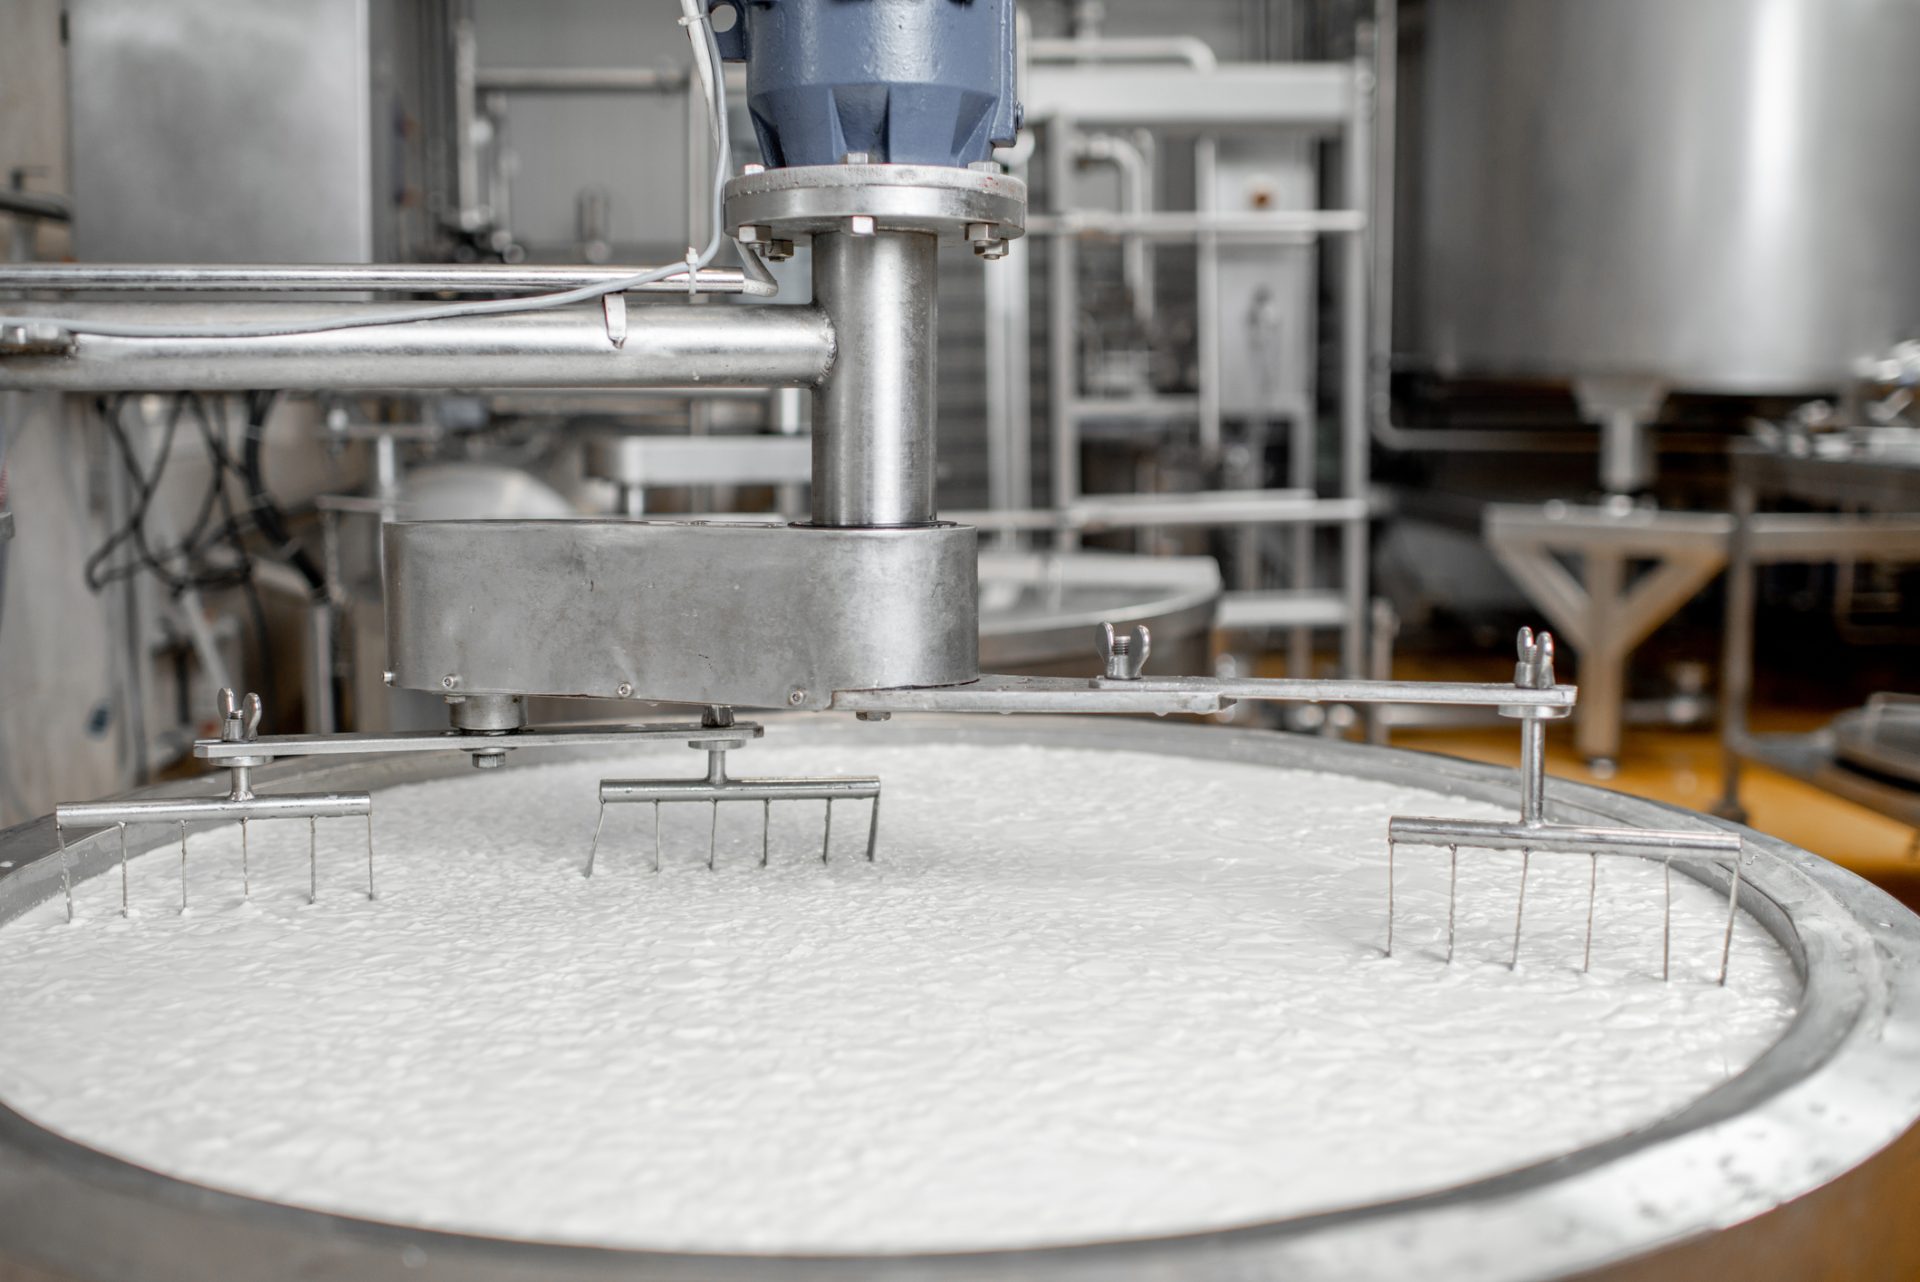 Validation and verification processes while making cheese in a food factory